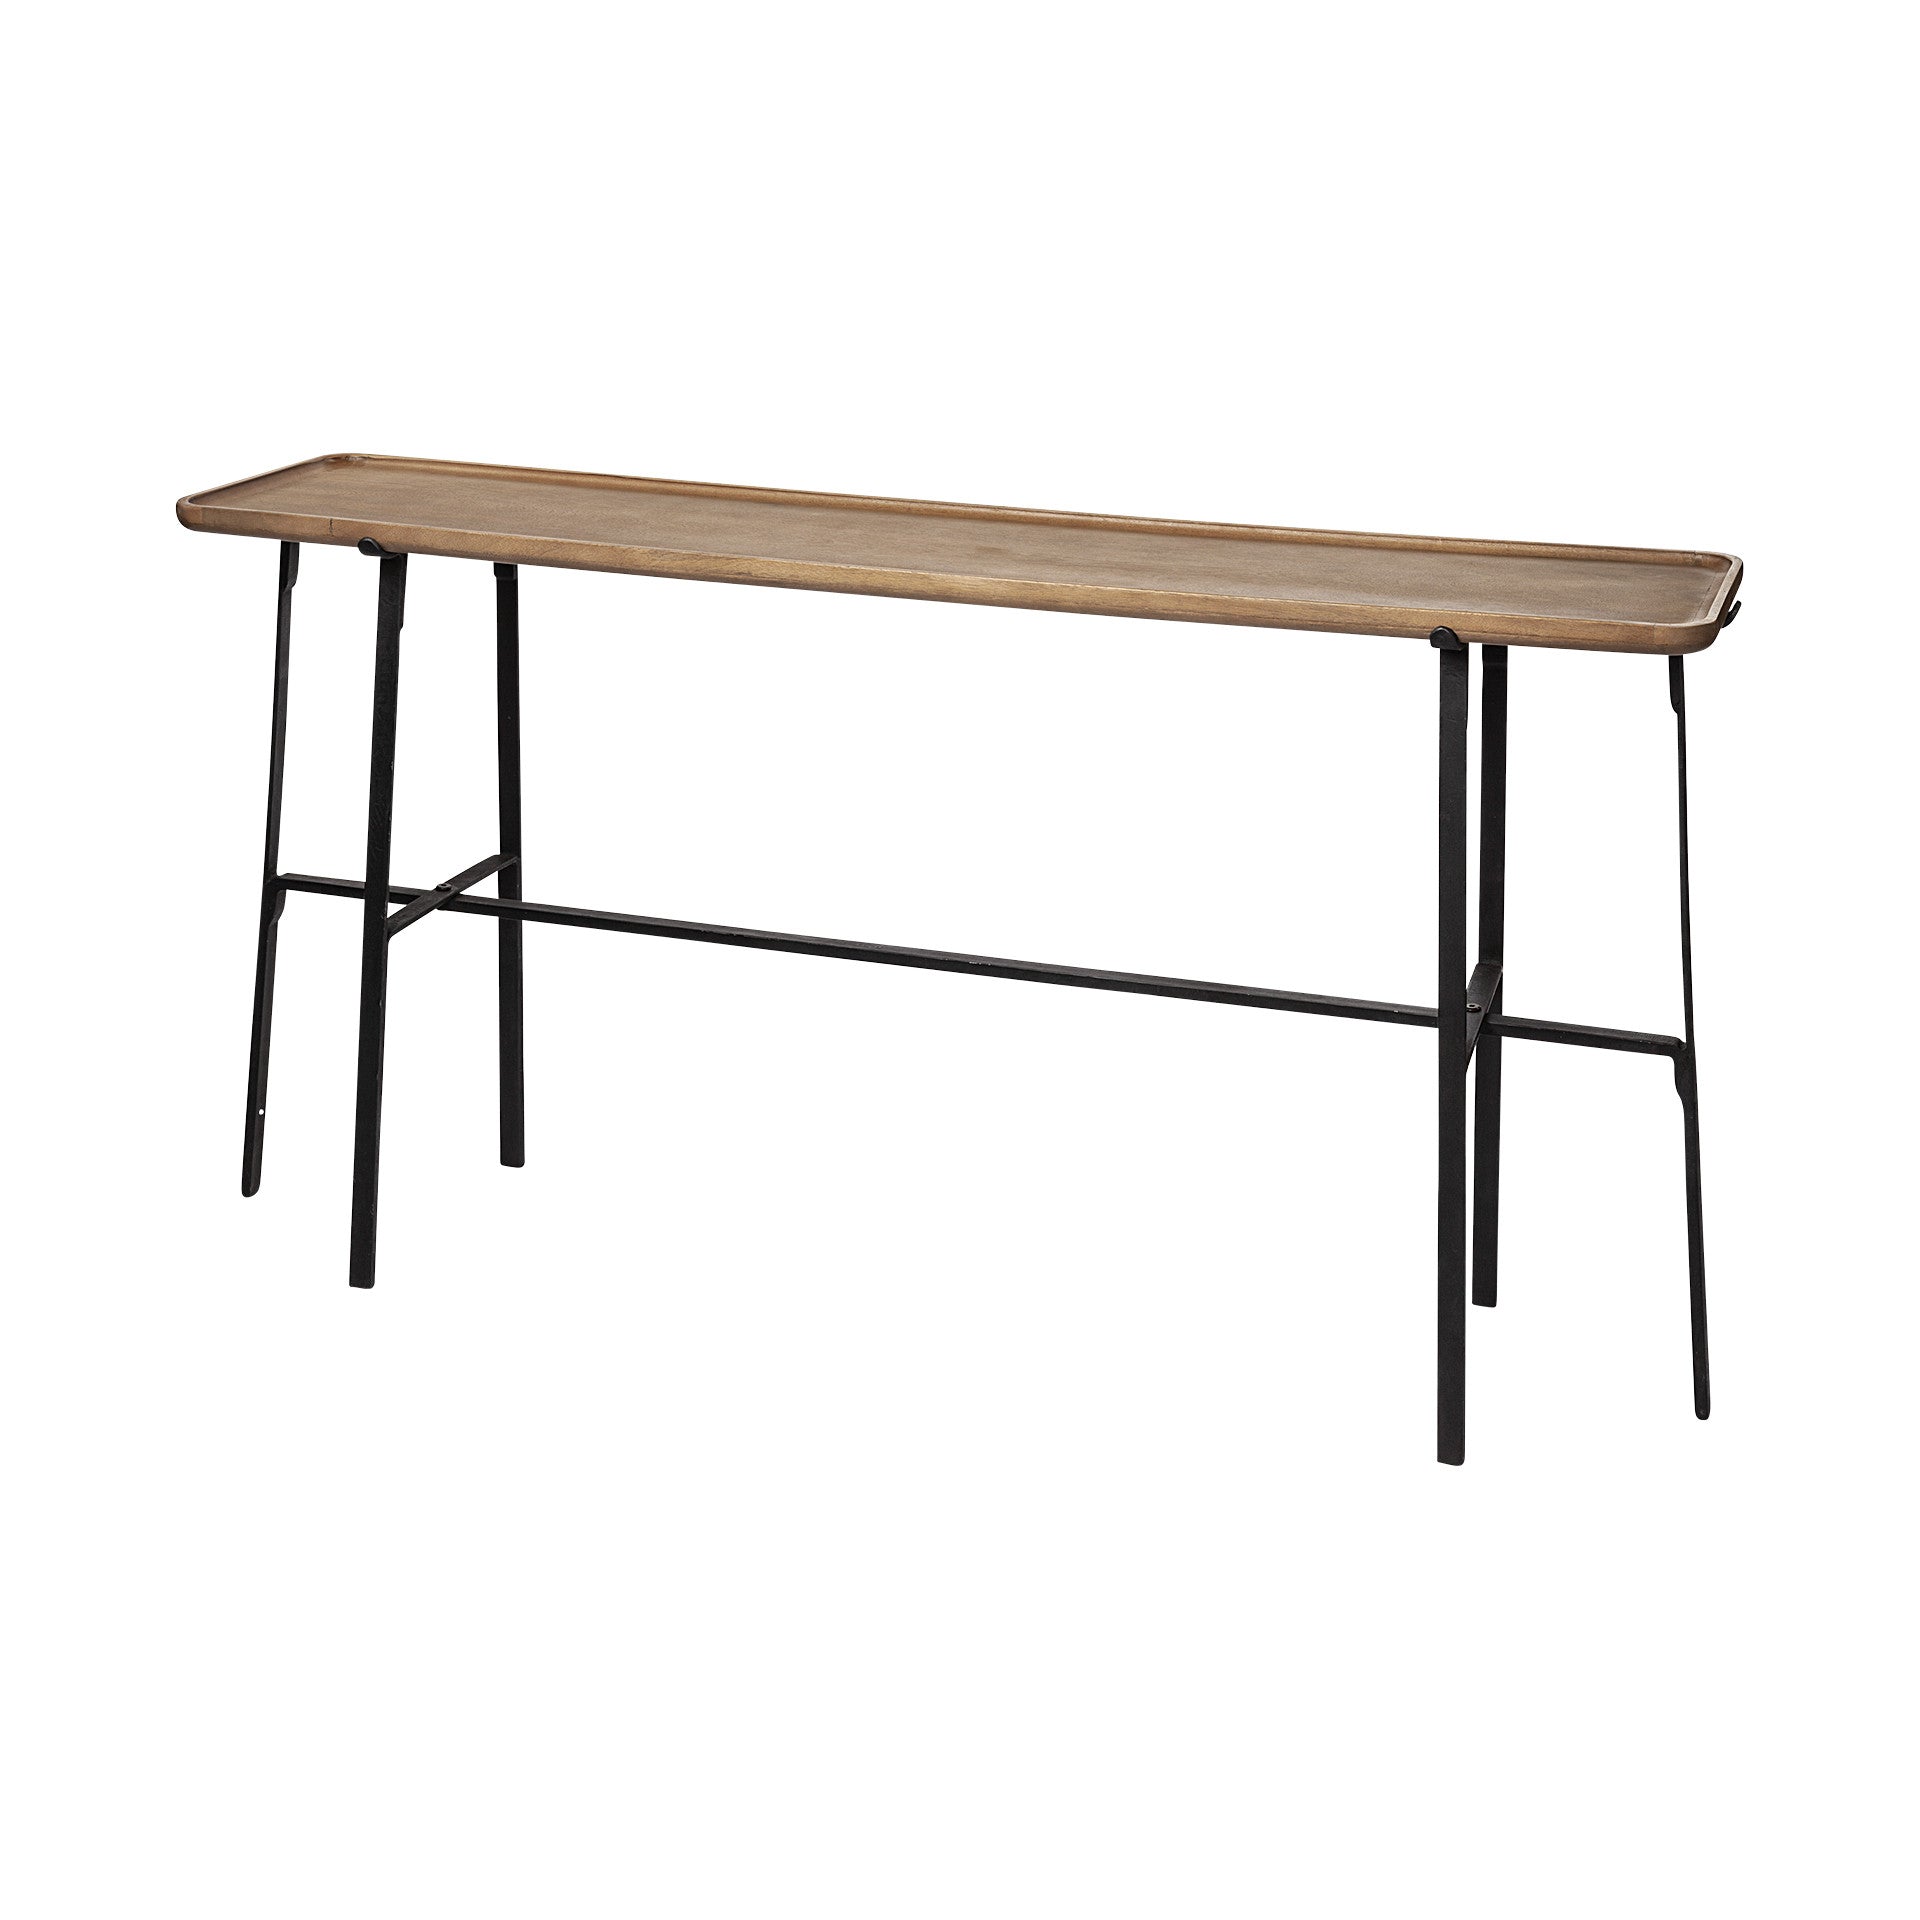 Rectangular Light Brown Raised Edge Mango Wood Finish Console Table With Black Metal Frame And Base